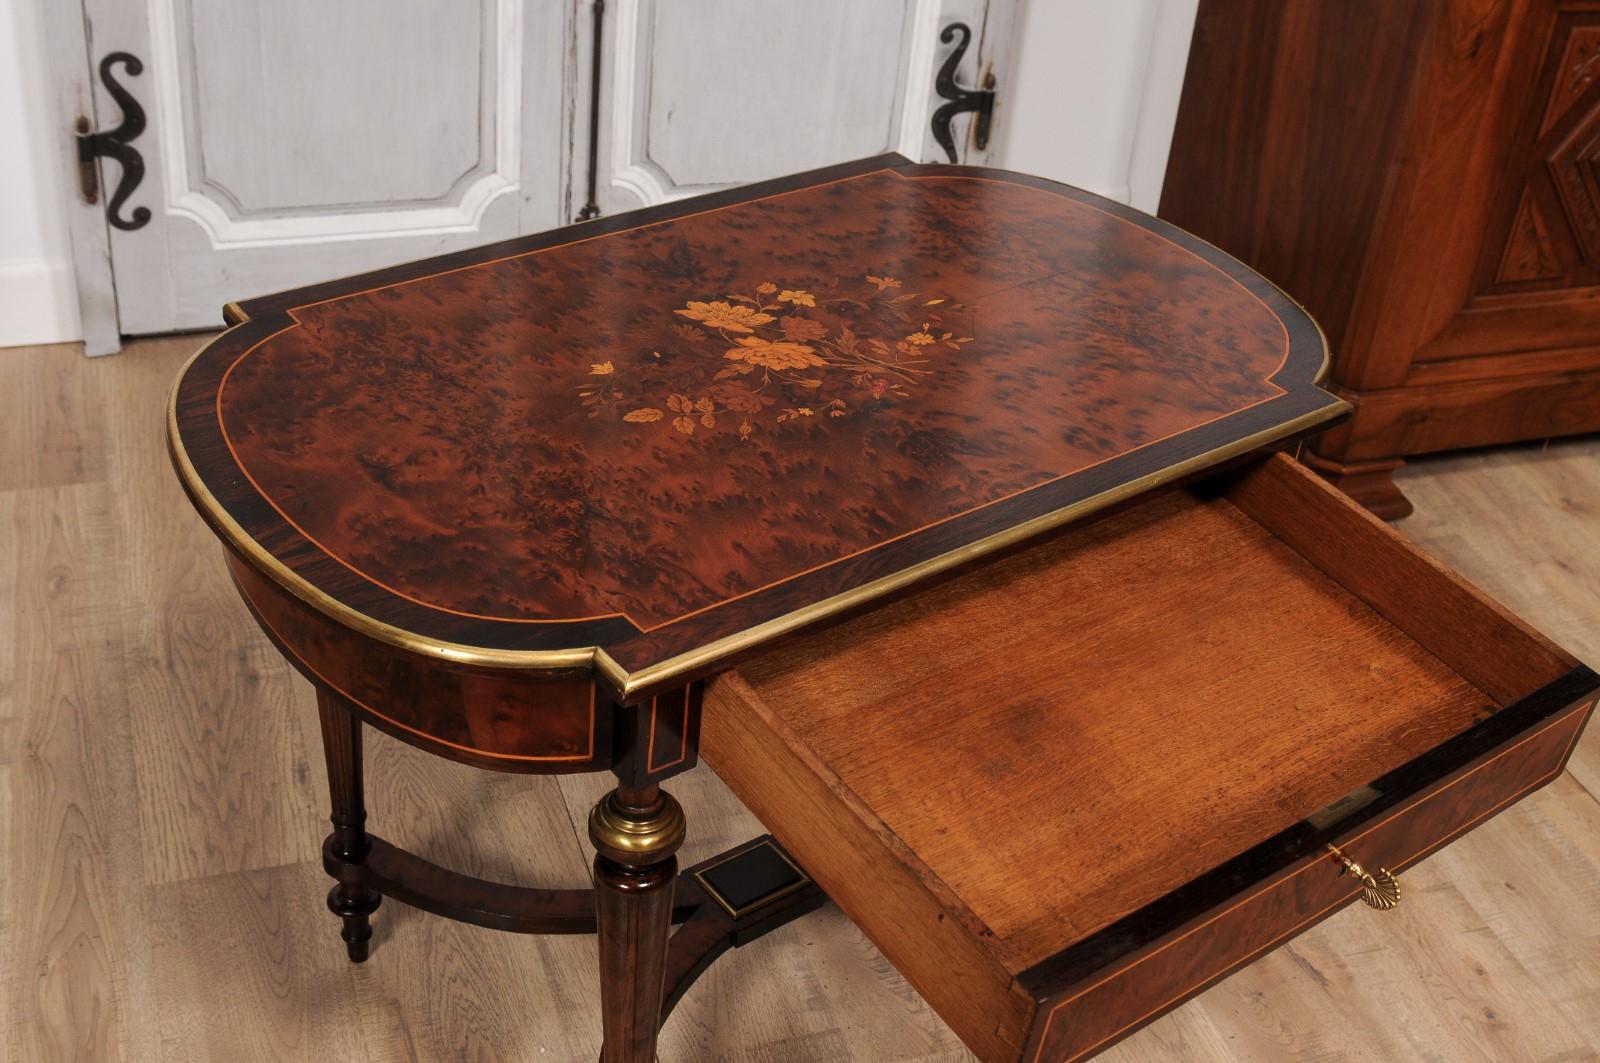 Italian 1890s Walnut, Mahogany and Brass Side Table with Floral Marquetry Décor For Sale 1